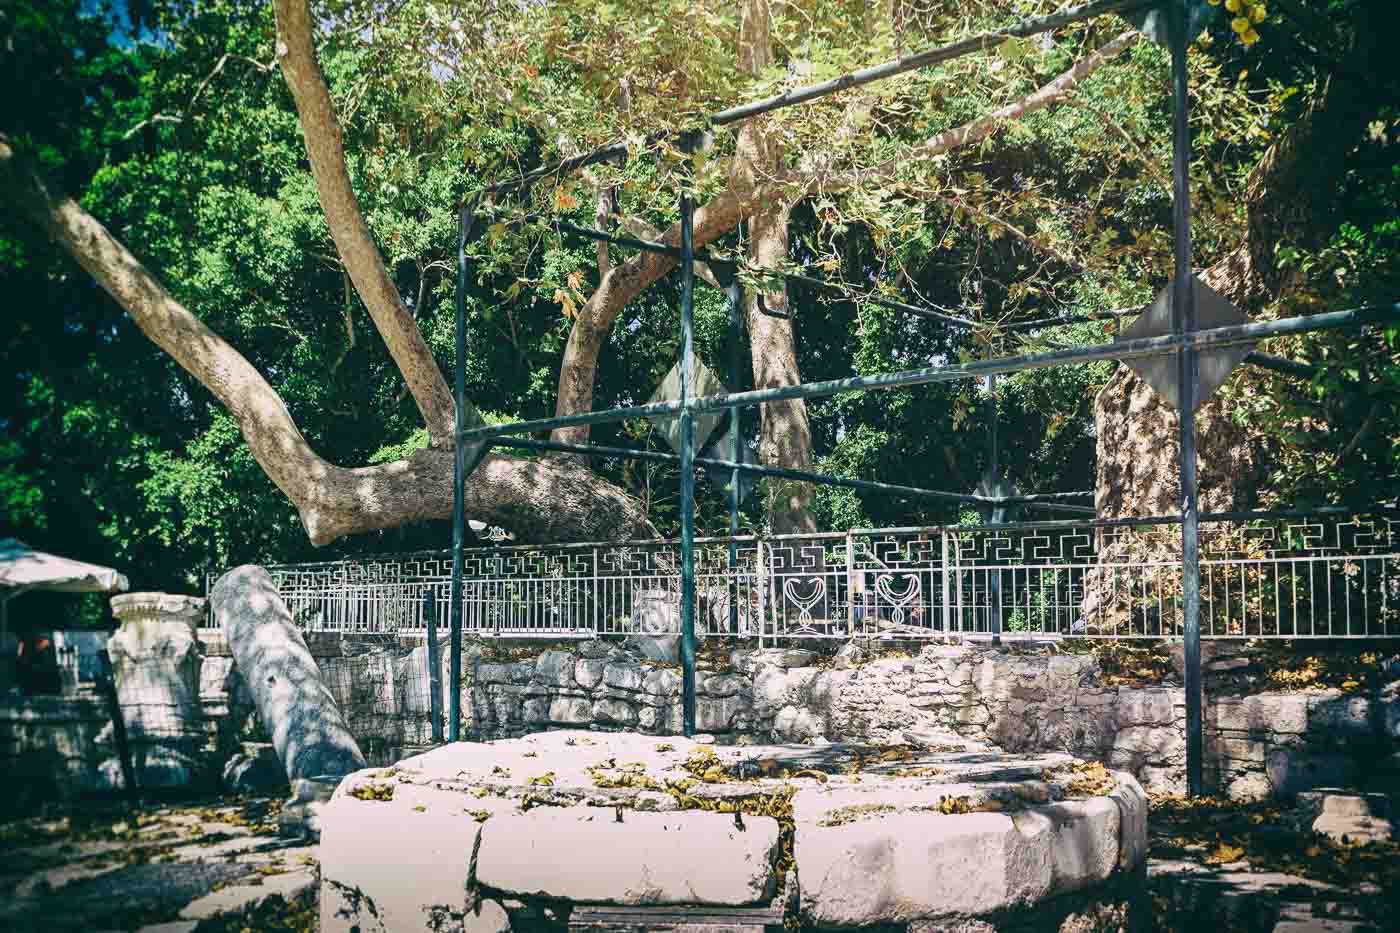 Next to the ancient Agora of Kos, opposite the fortress of Neratzia, is where you will find one of the oldest trees in Kos: the tree of Hippocrates. This historical tree is visited by thousands of people every year due to a story that became a legend.